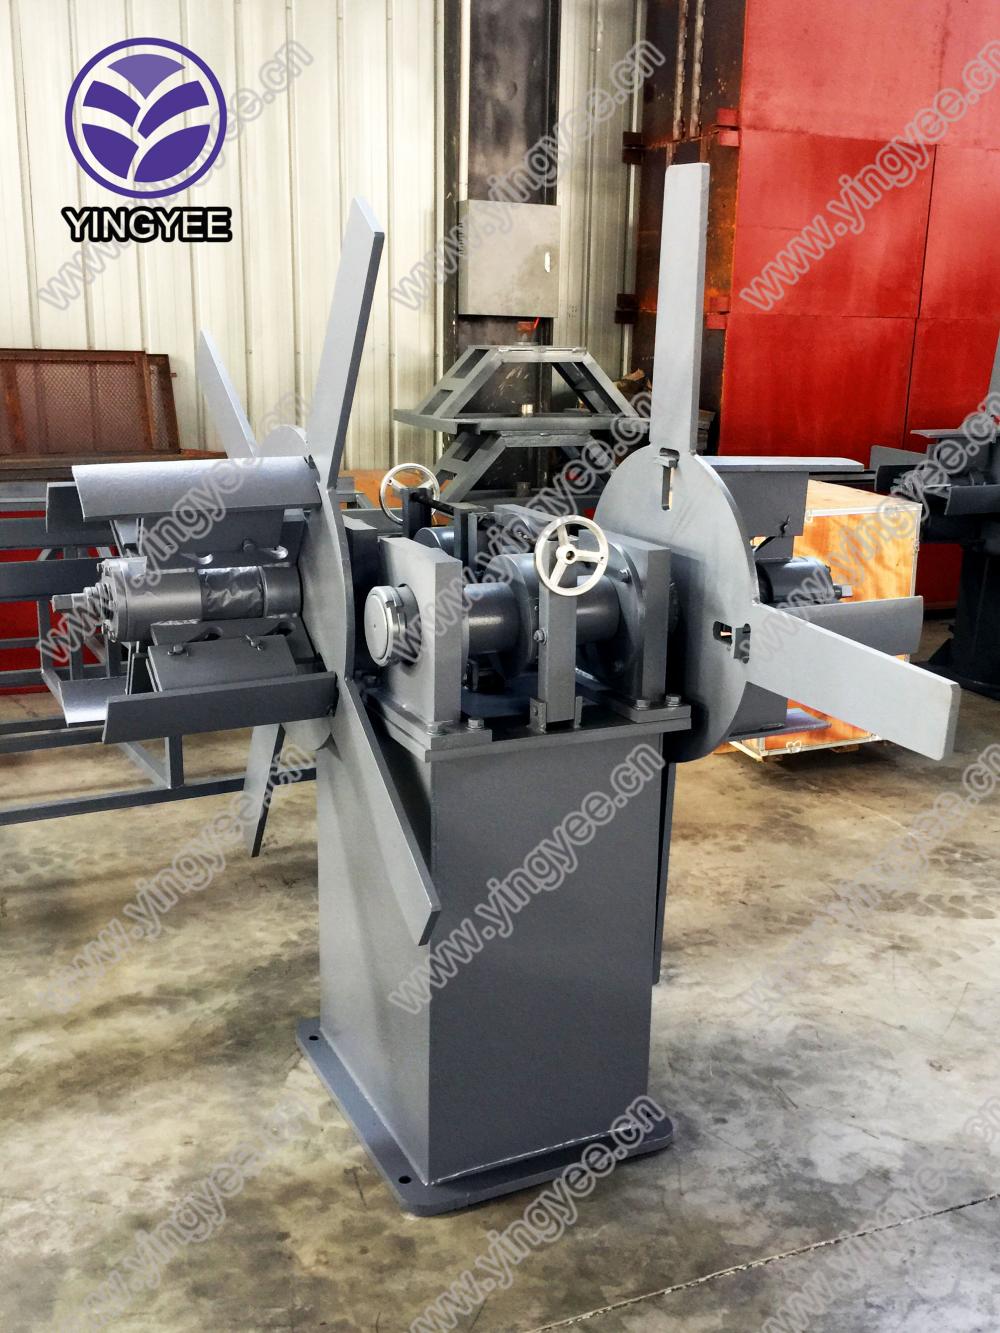 Double Out Machine From Yingyee011